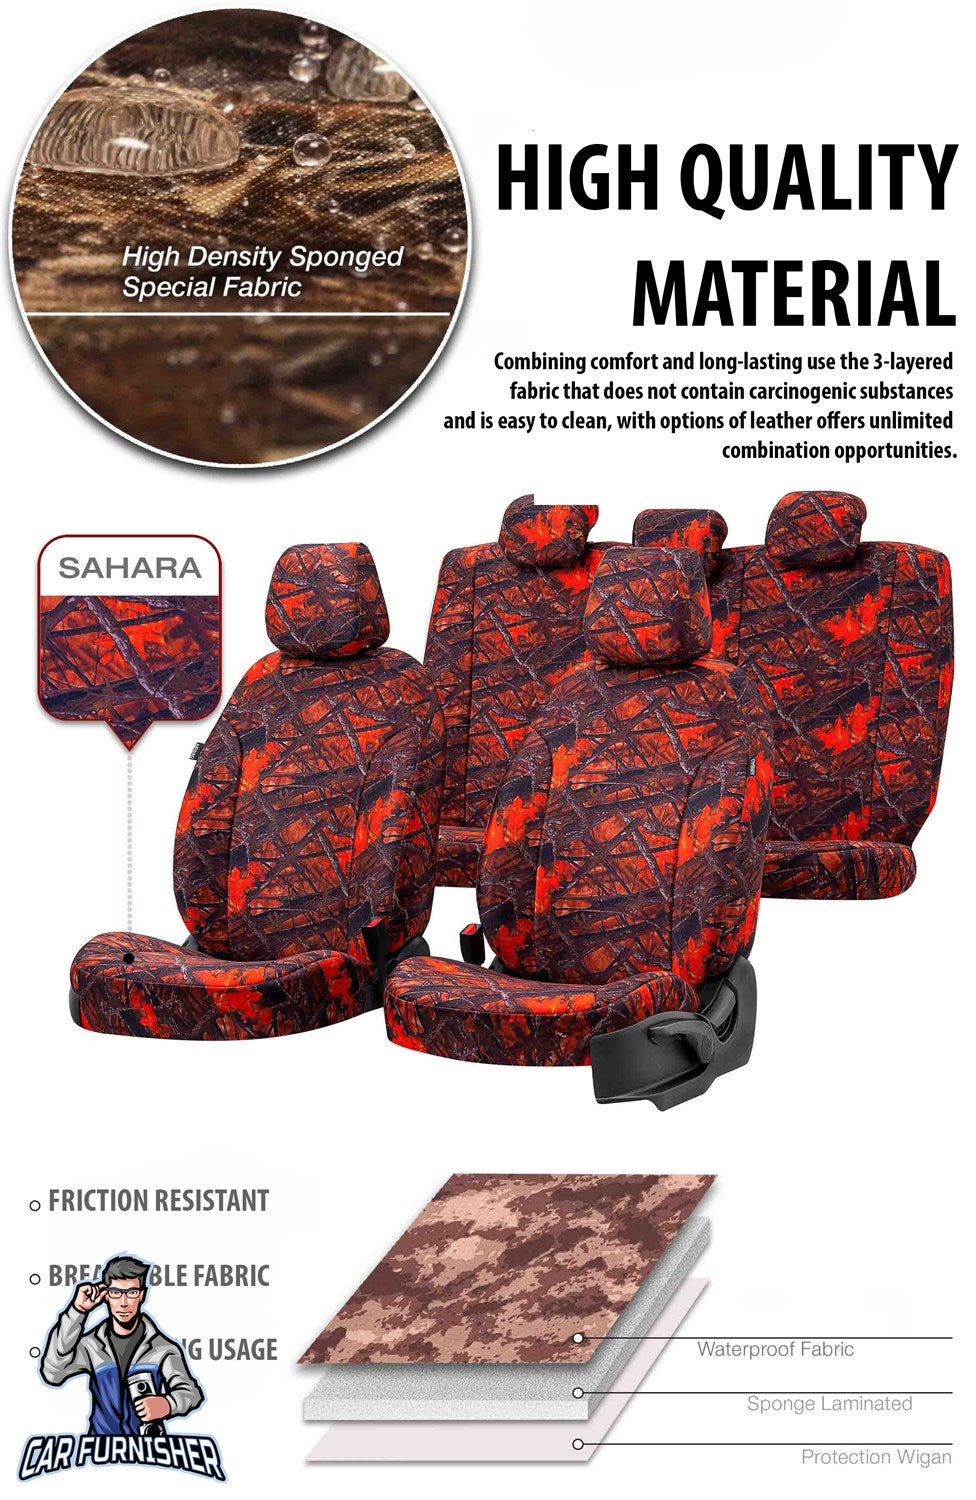 Ford Focus Seat Covers Camouflage Waterproof Design Everest Camo Waterproof Fabric